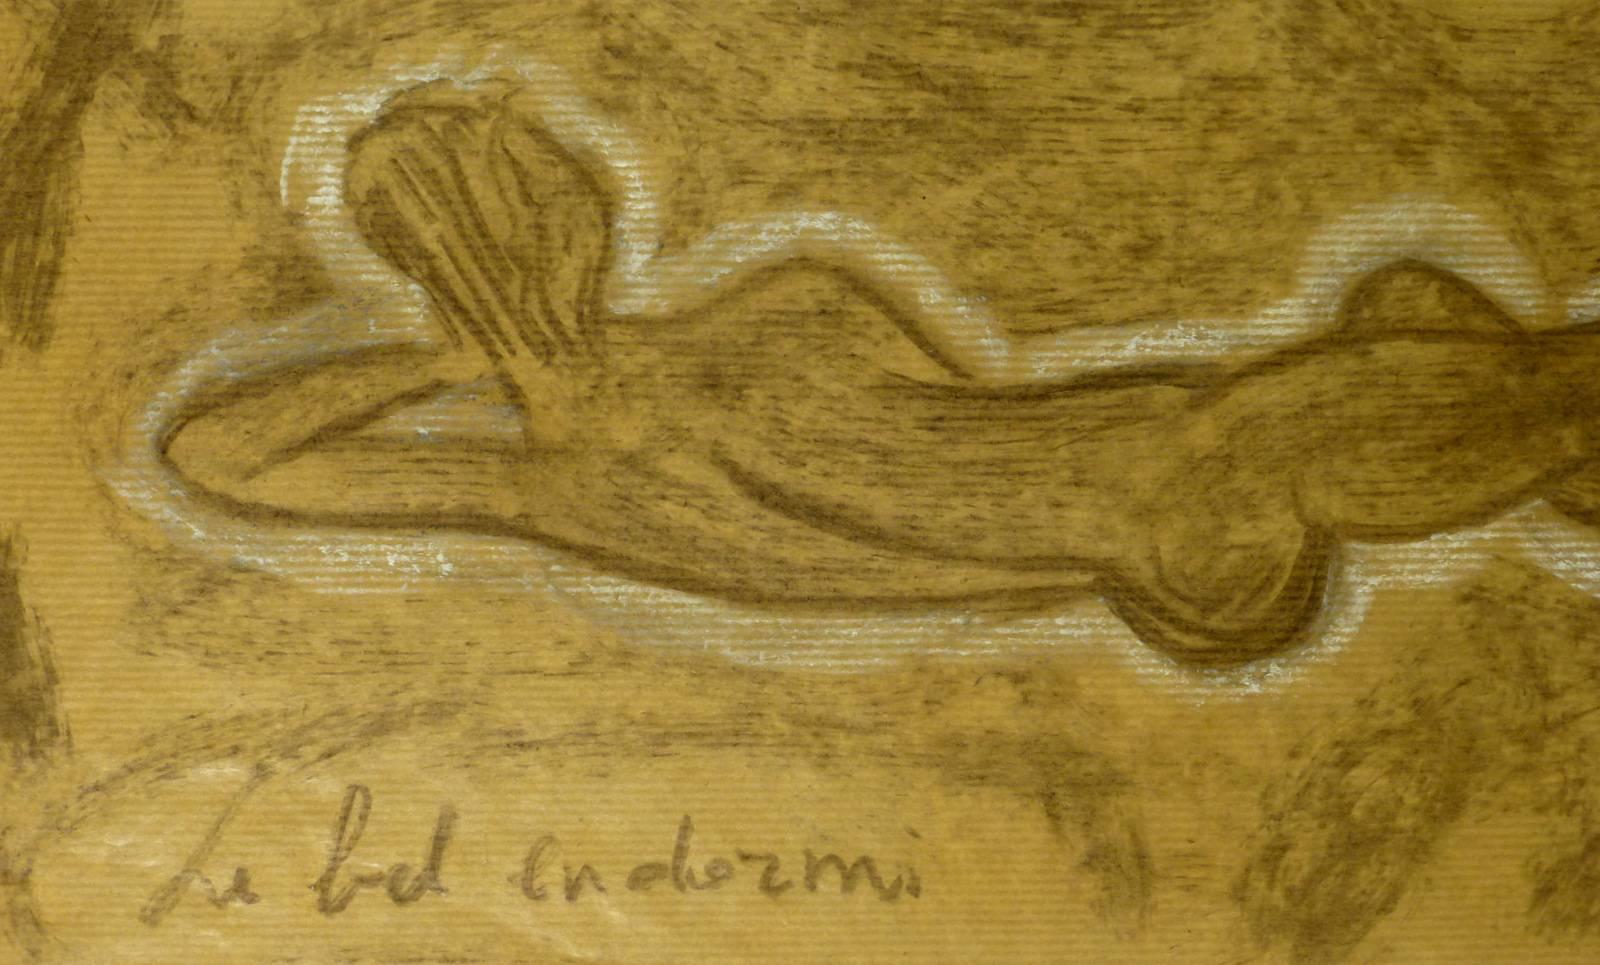 Warm charcoal drawing of pair of nudes laying on sides in rich earth tones, circa 1980. Signed lower left.  

Original artwork on paper displayed on a white mat with a gold border. Archival plastic sleeve and Certificate of Authenticity included.